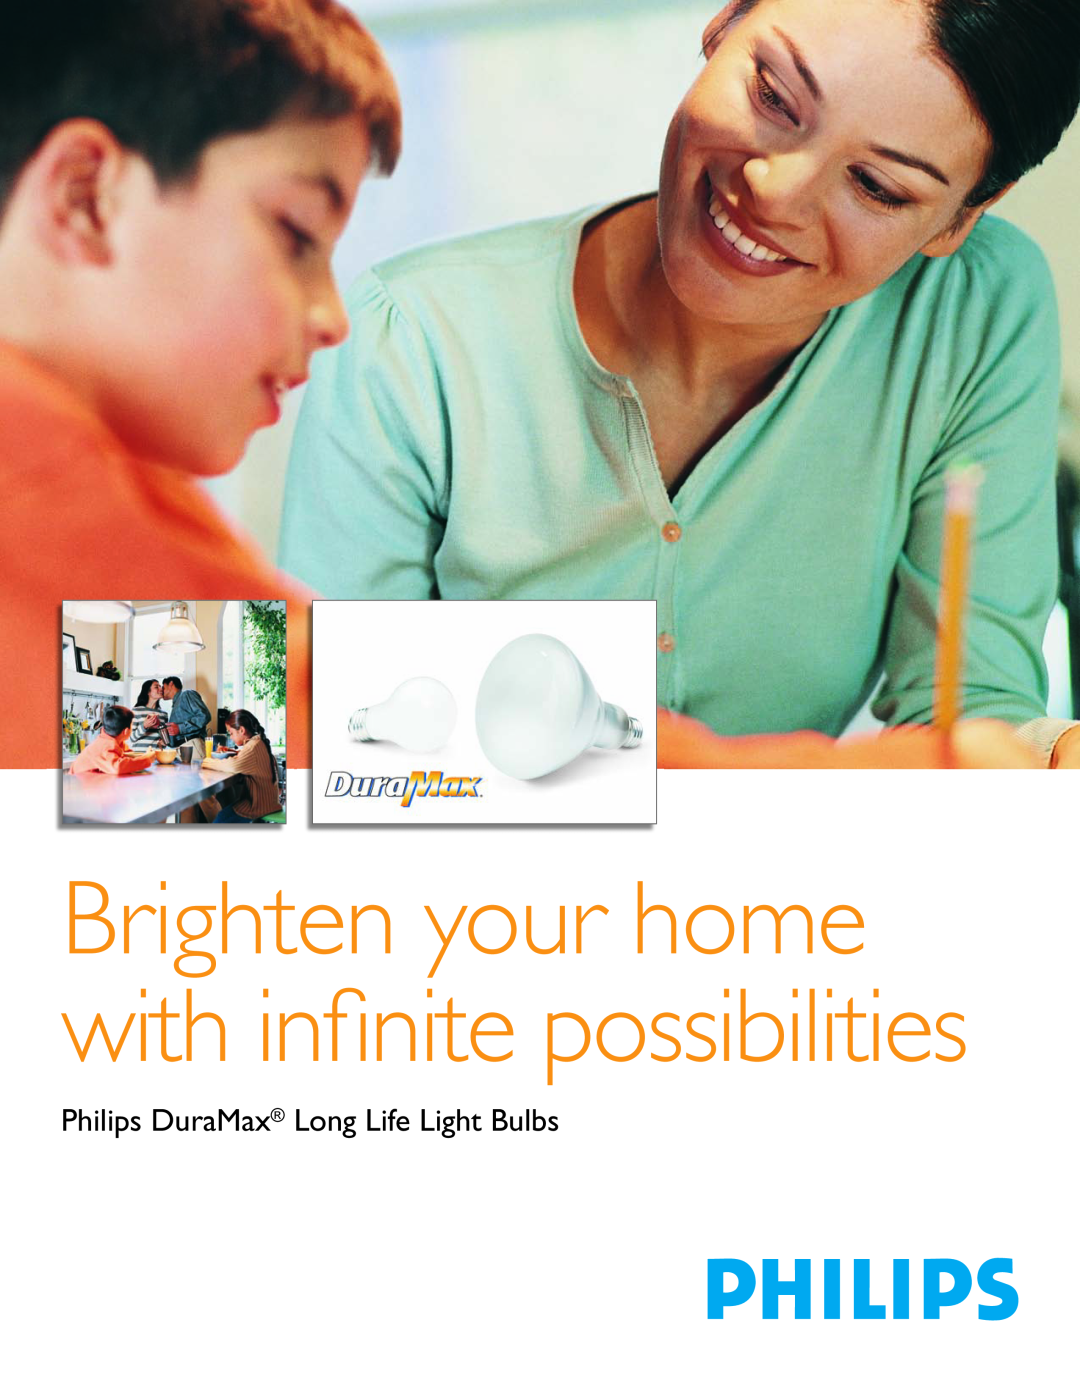 Philips manual Brighten your home with inﬁnitepossibilities, Philips DuraMax Long Life Light Bulbs 